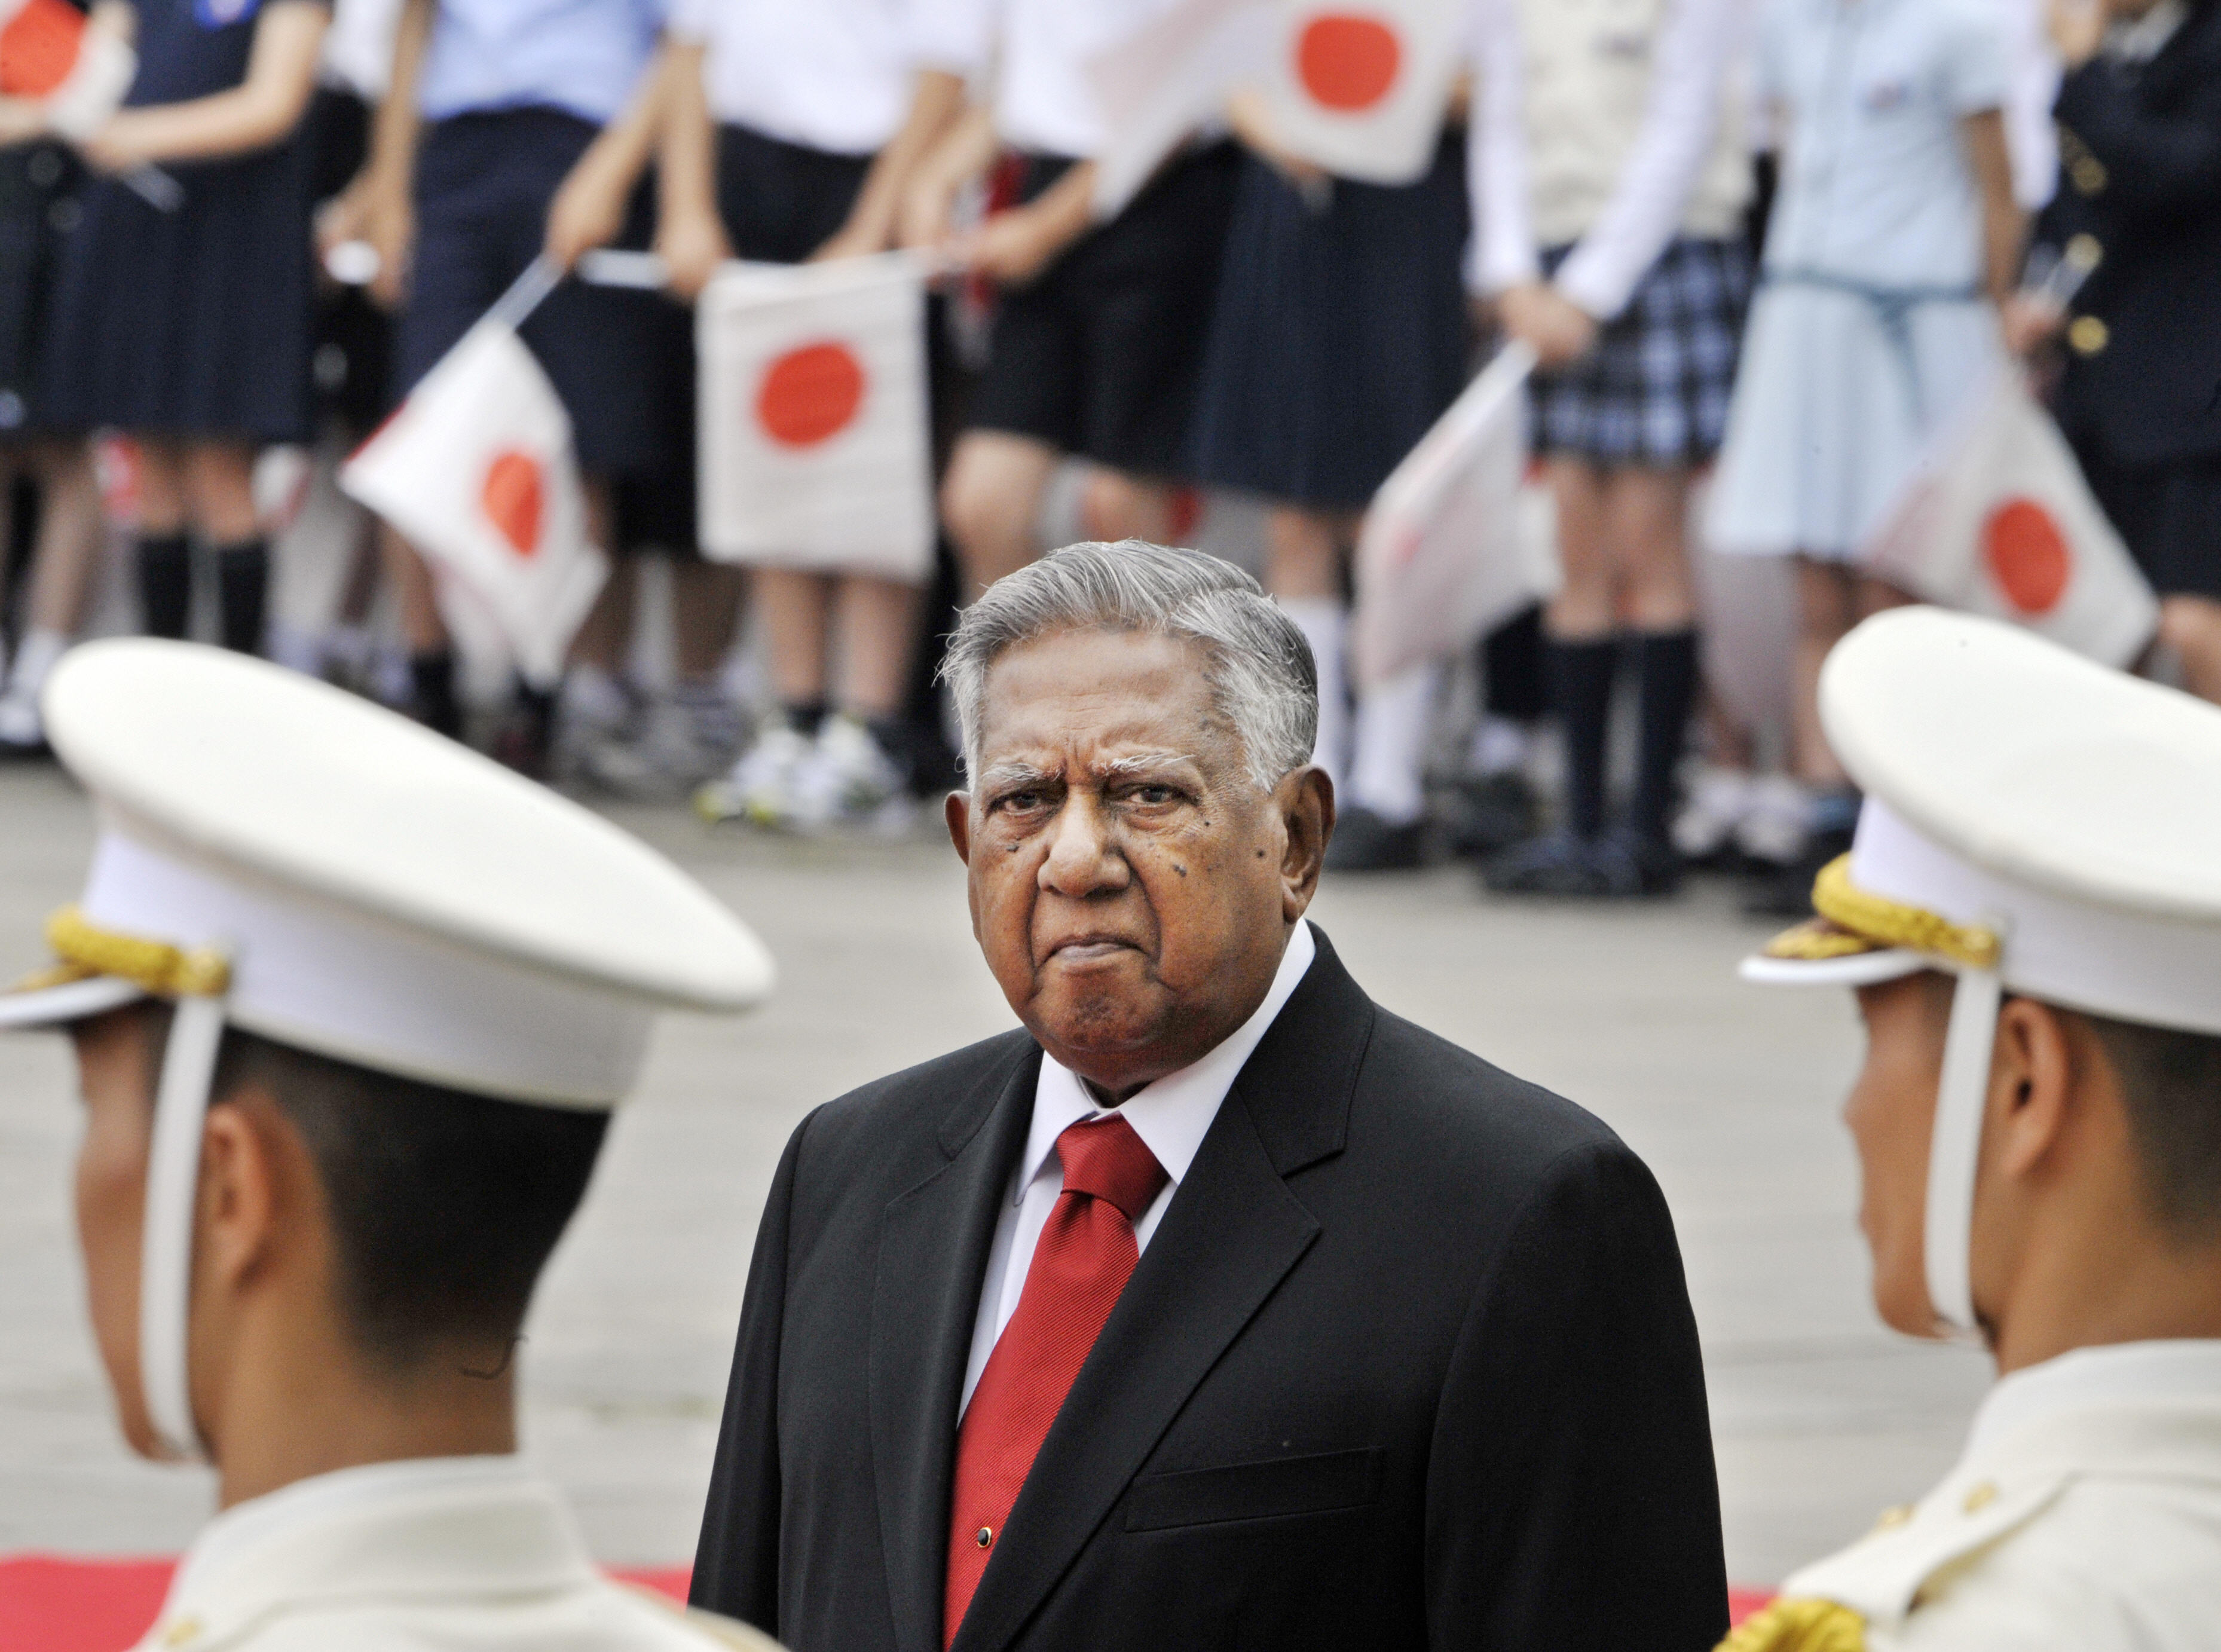 Visiting Singaporean President S.R. Nathan (C) inspects the honor guards during the welcoming ceremony at the Imperial Palace in Tokyo on May 11, 2009. Nathan is now here on a week-long state visit to Japan. AFP PHOTO / POOL/ Yoshikazu TSUNO (Photo credit should read YOSHIKAZU TSUNO/AFP/Getty Images)